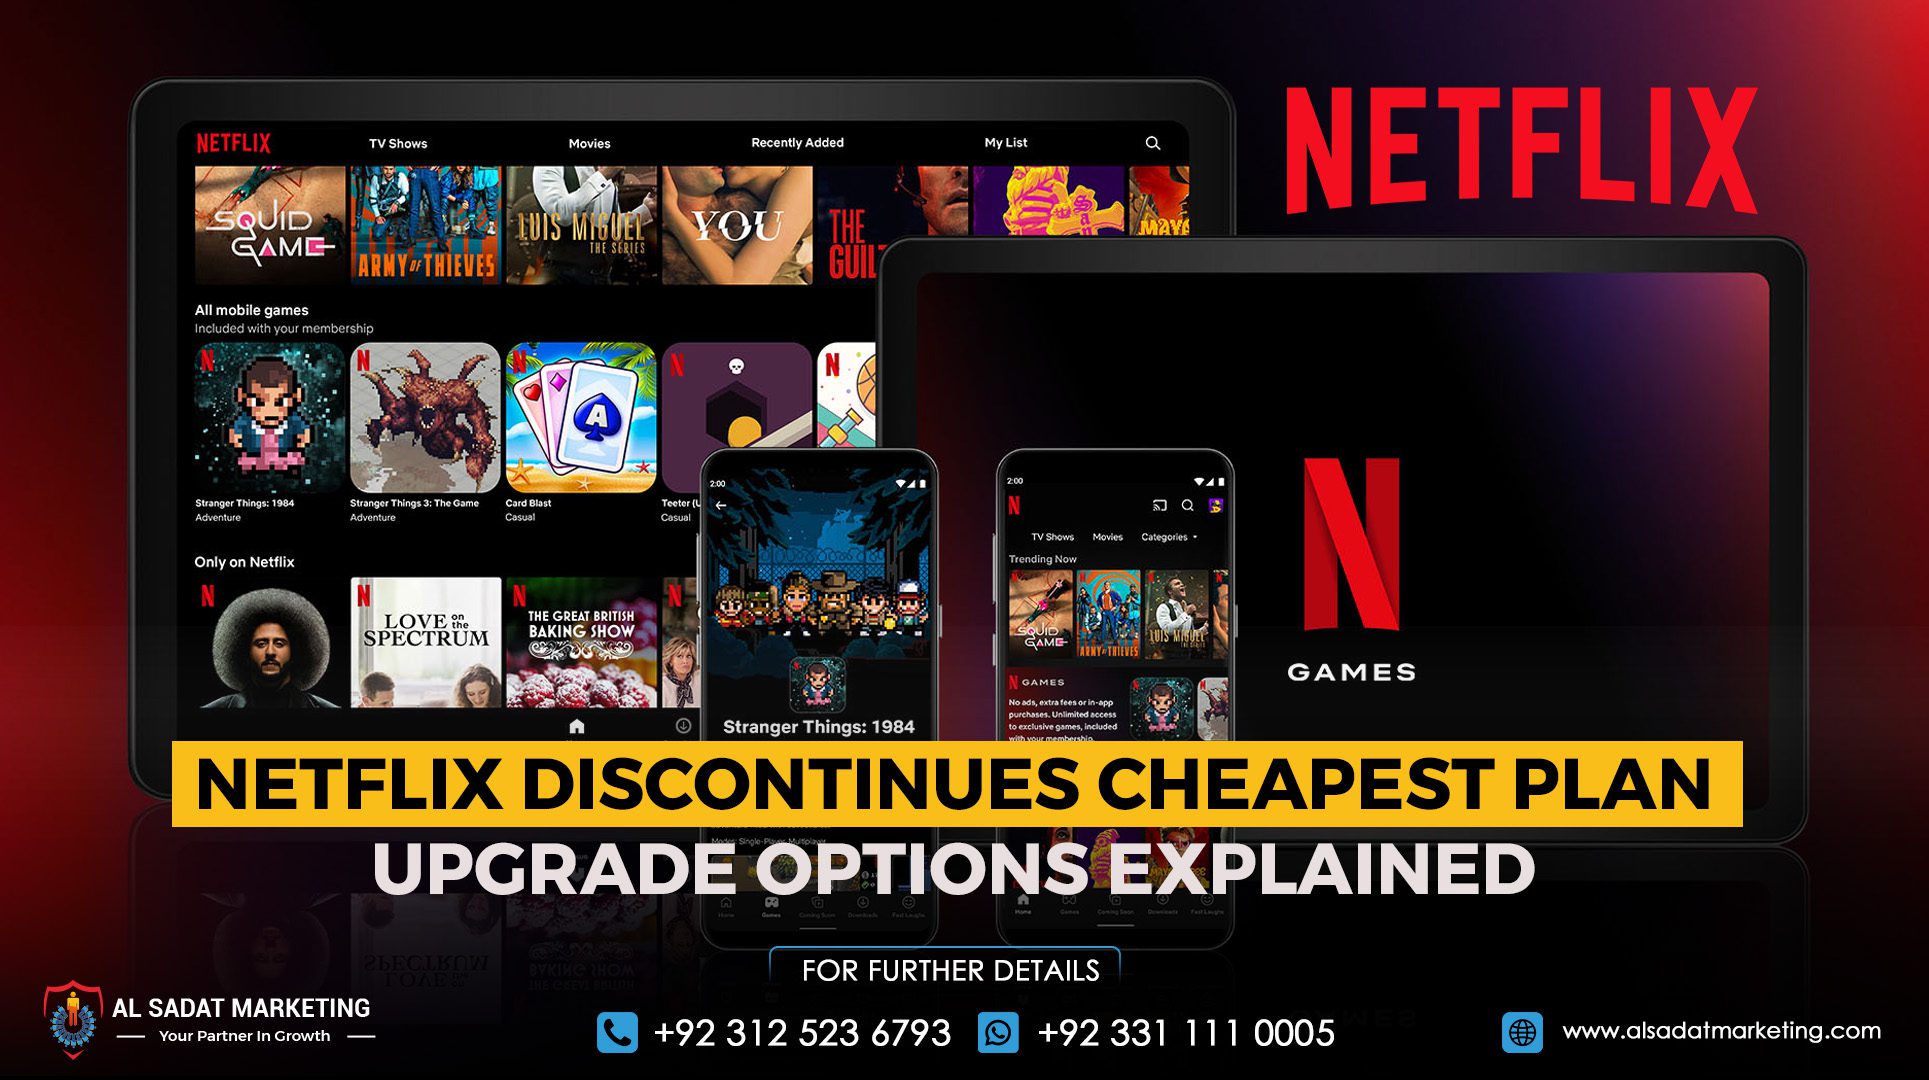 Netflix Discontinues Cheapest Plan Upgrade Options Explained